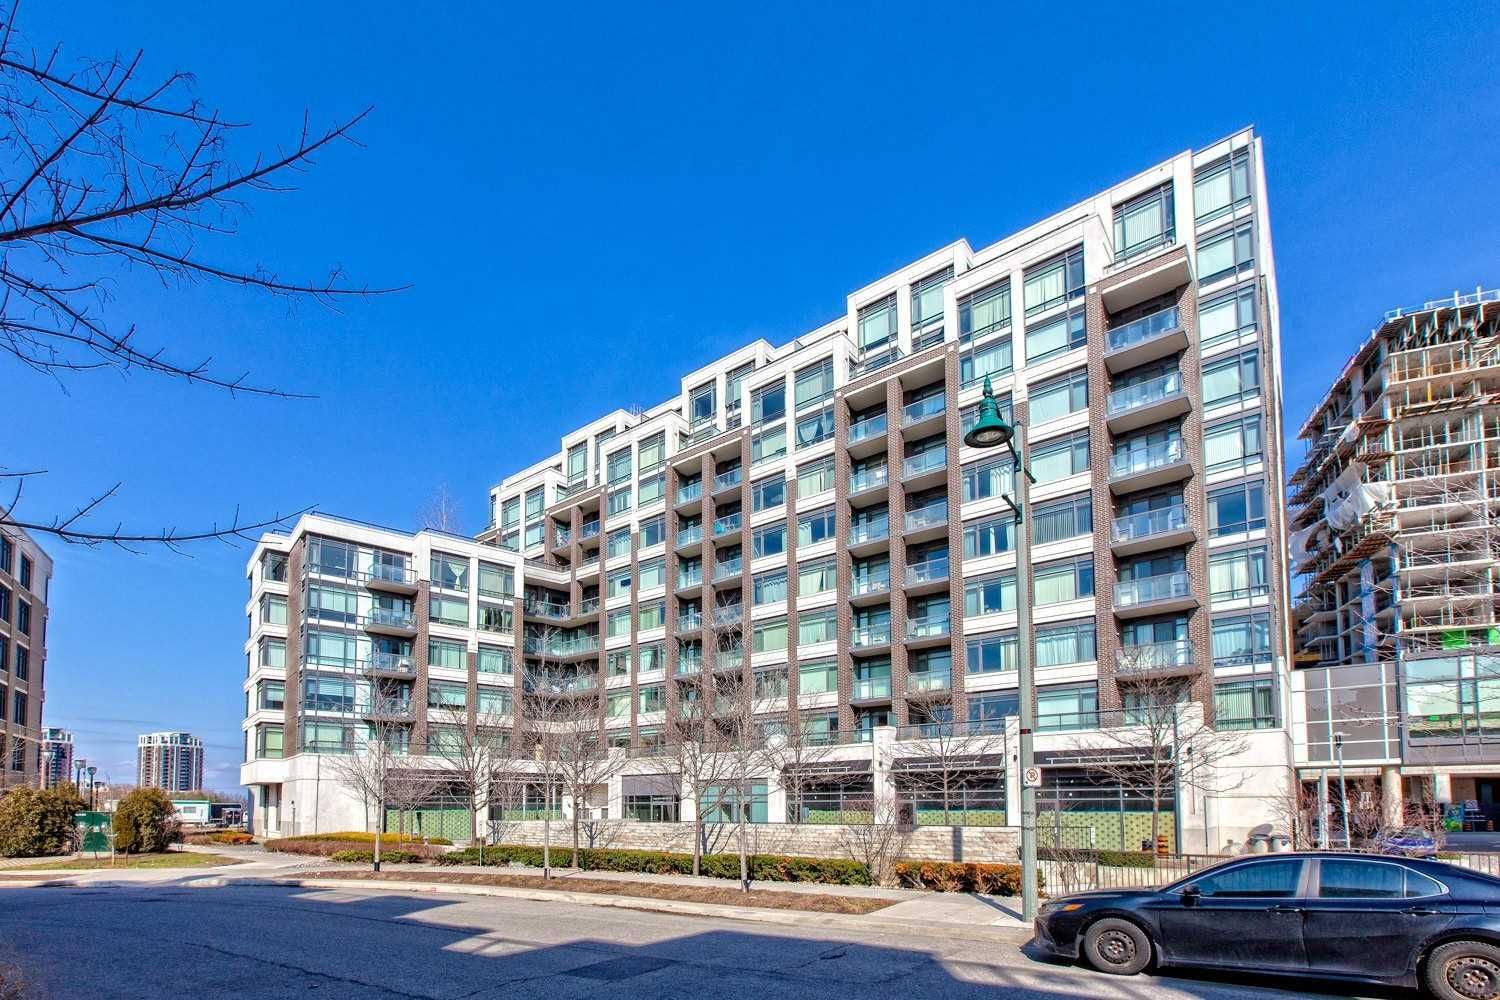 8130 Birchmount Rd. This condo at Nexus Condos is located in  Markham, Toronto - image #3 of 3 by Strata.ca